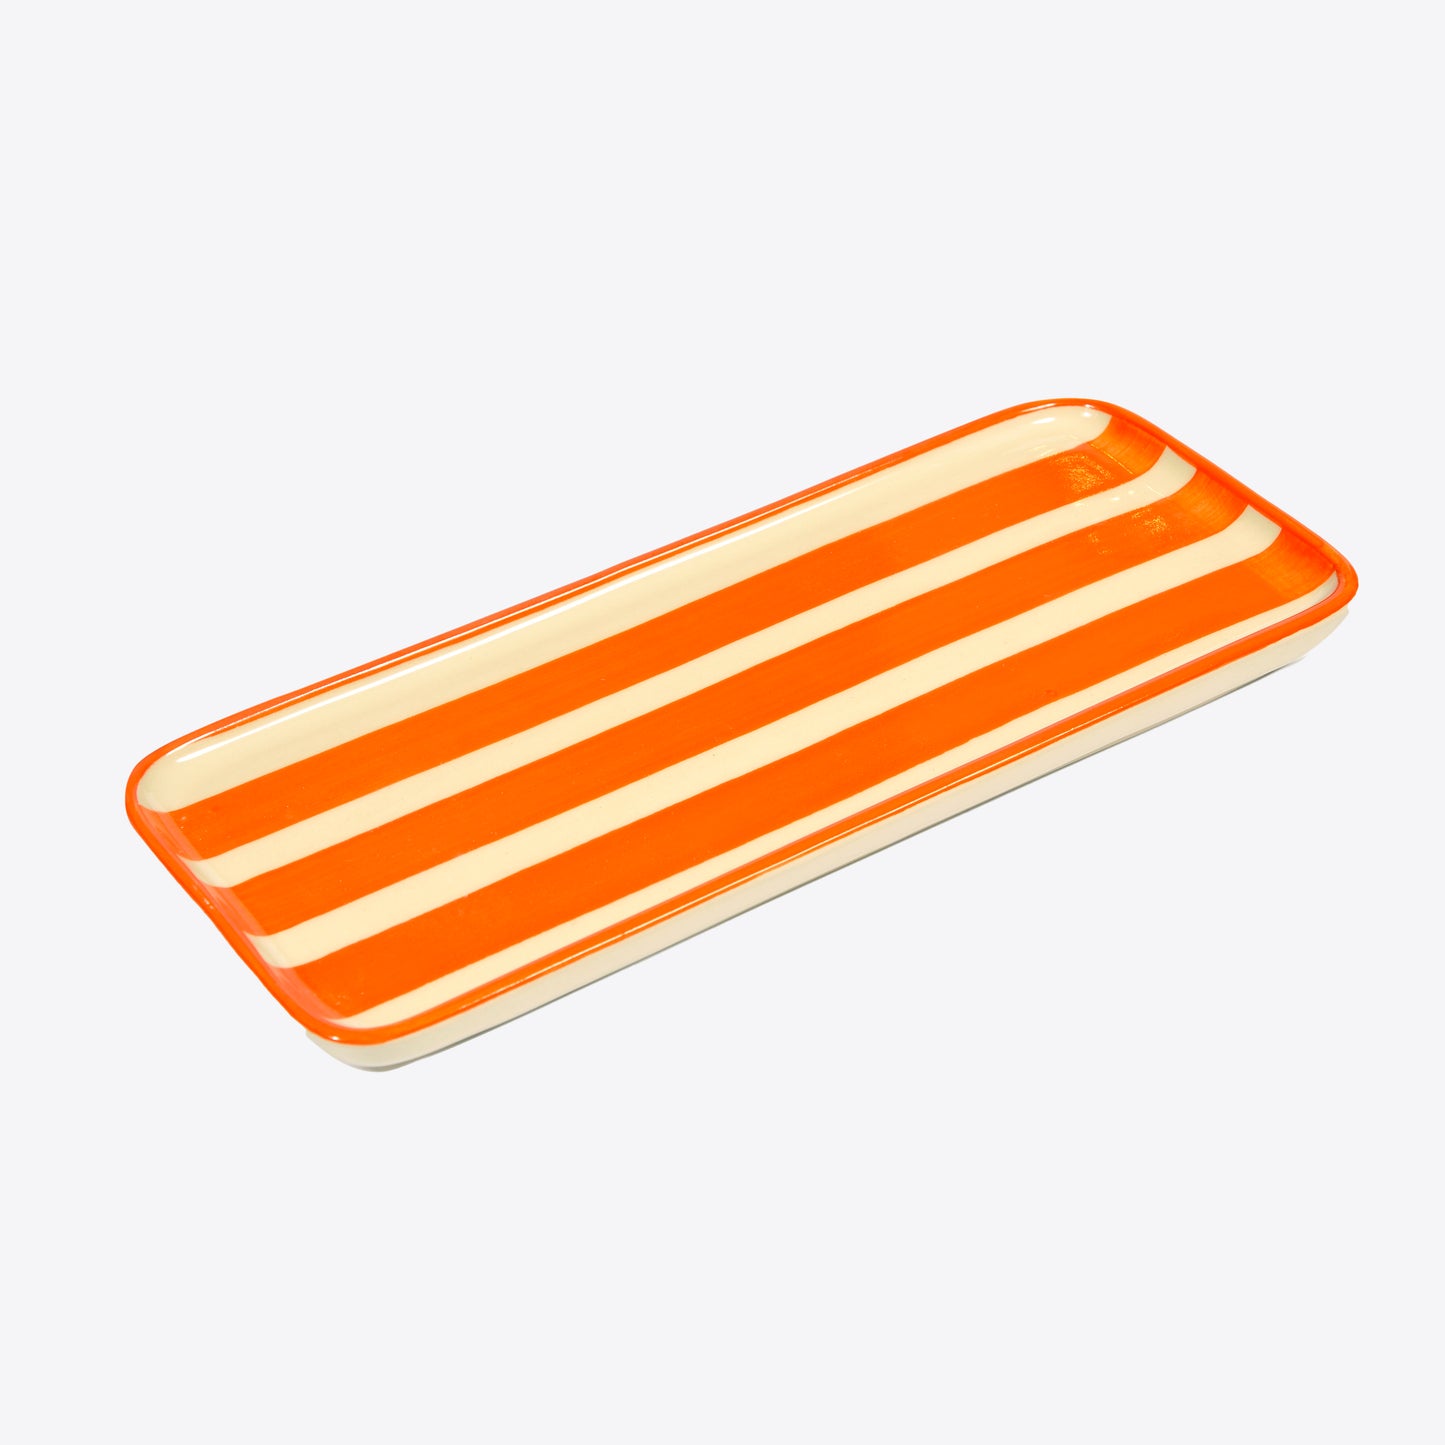 Orange Striped Porcelain Tray Not specified